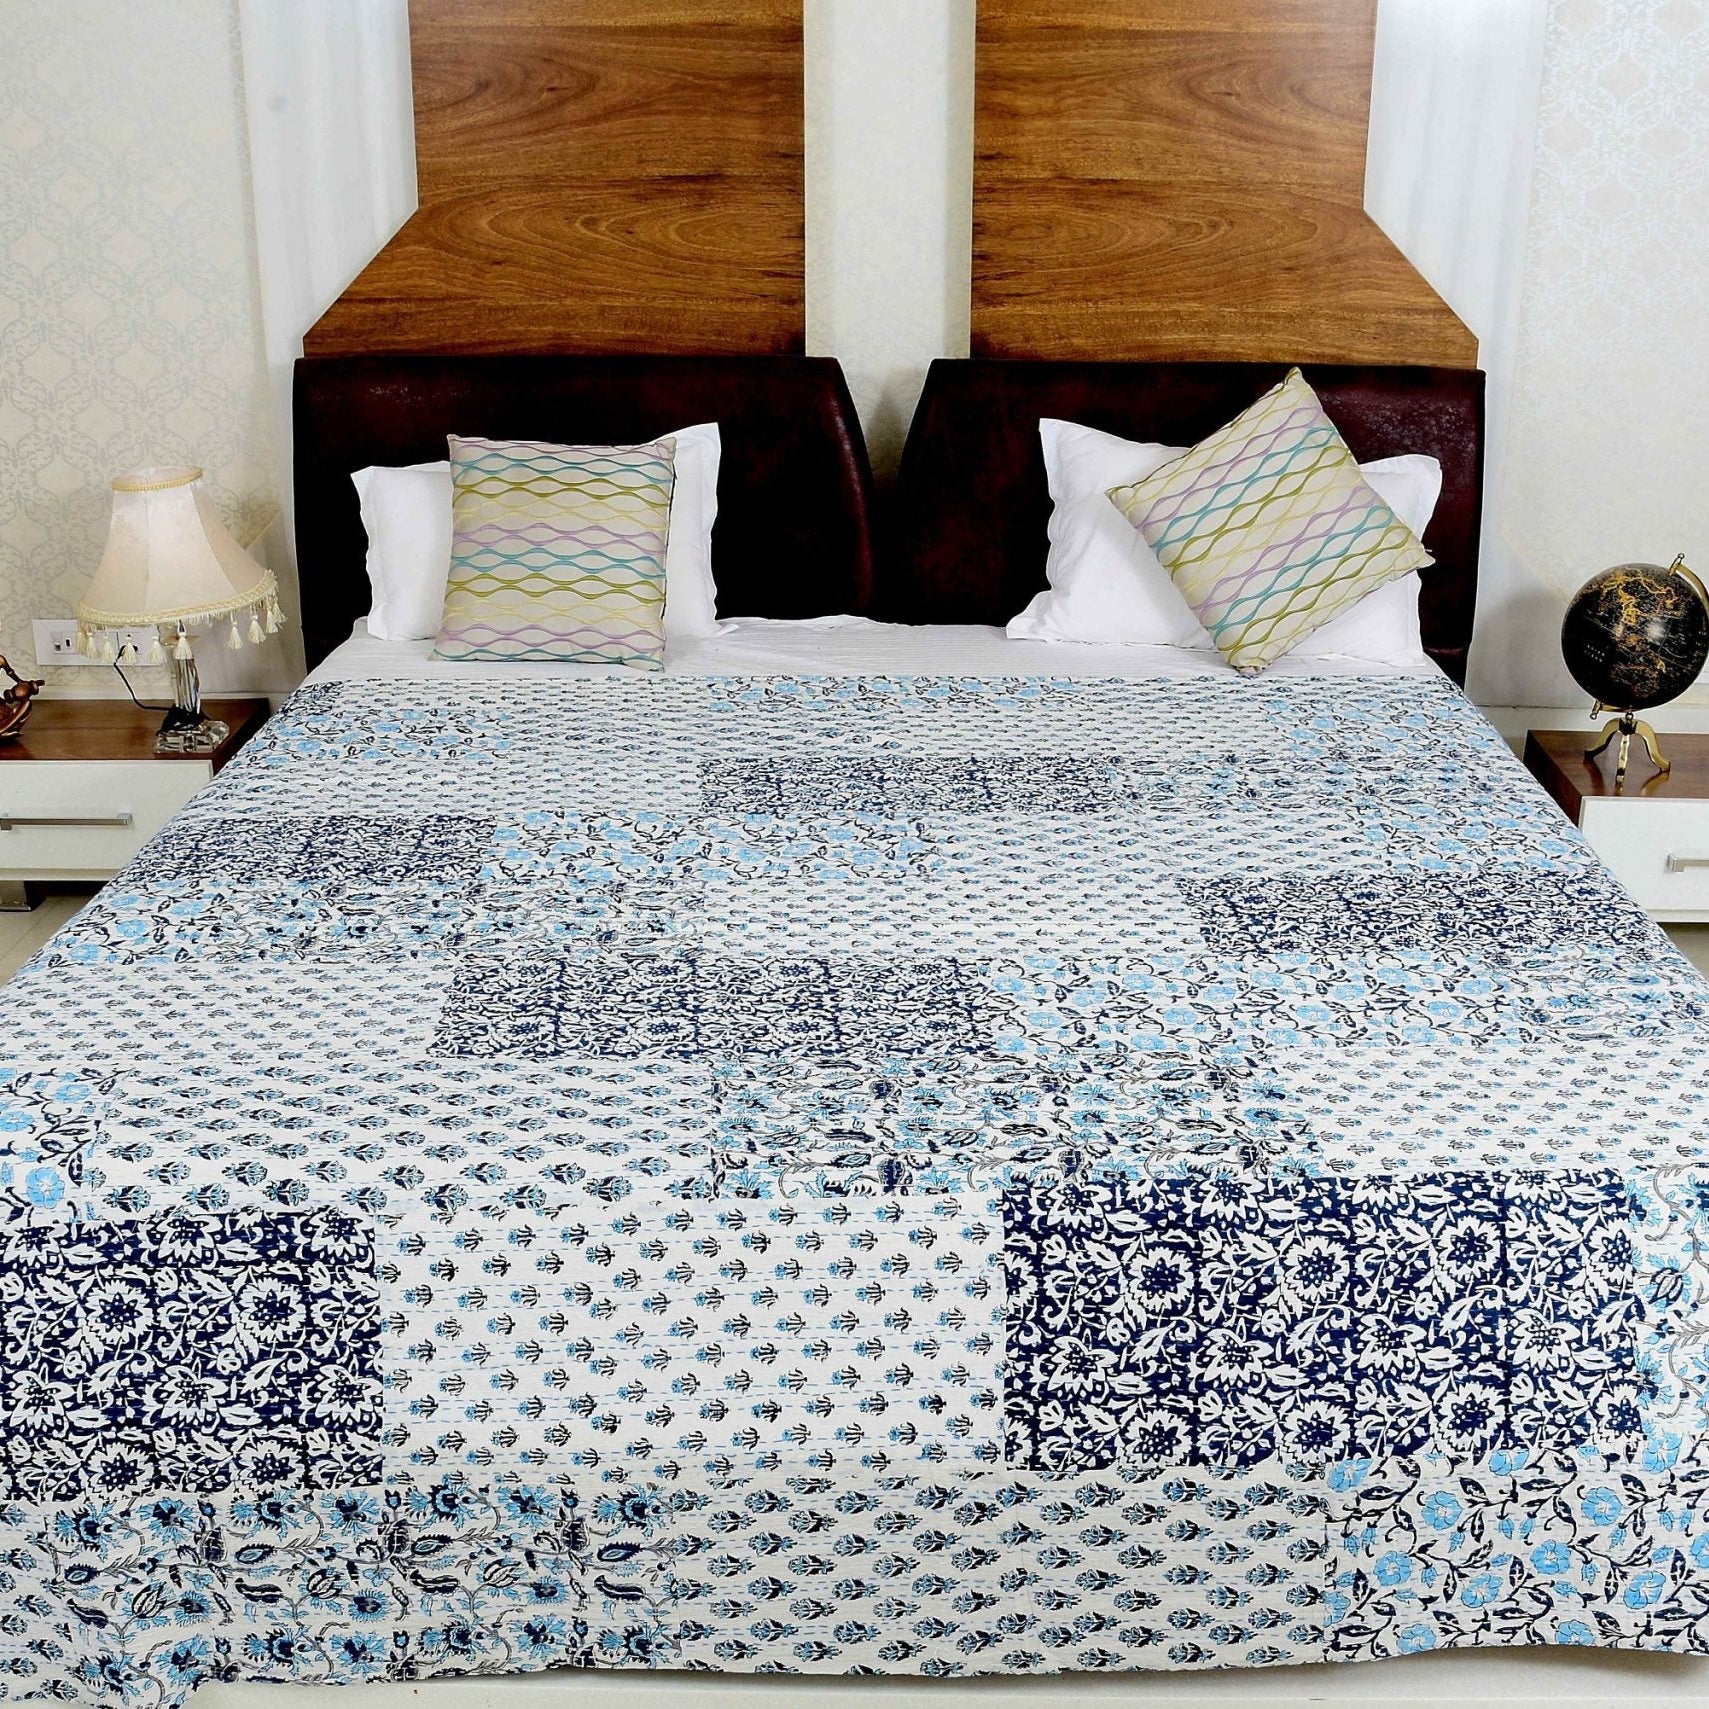 Linen Connections Indian Kantha Quilt - White Swan